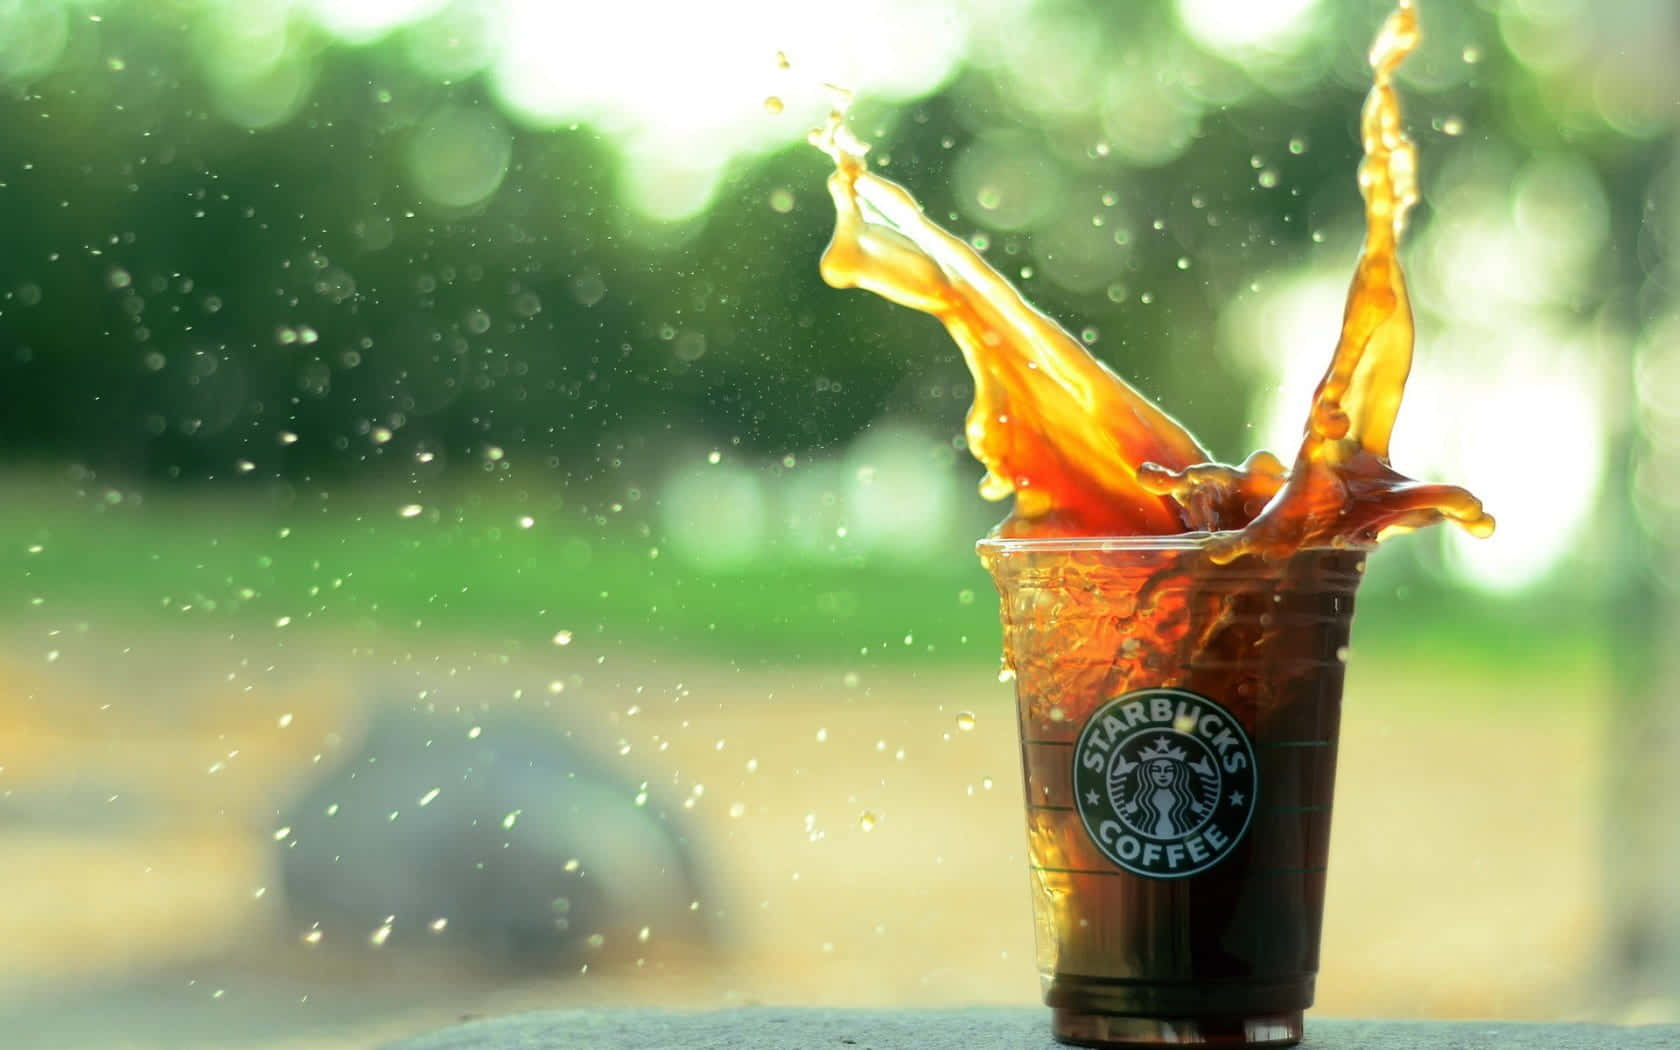 Starbucks Iced Coffee Pouring Water